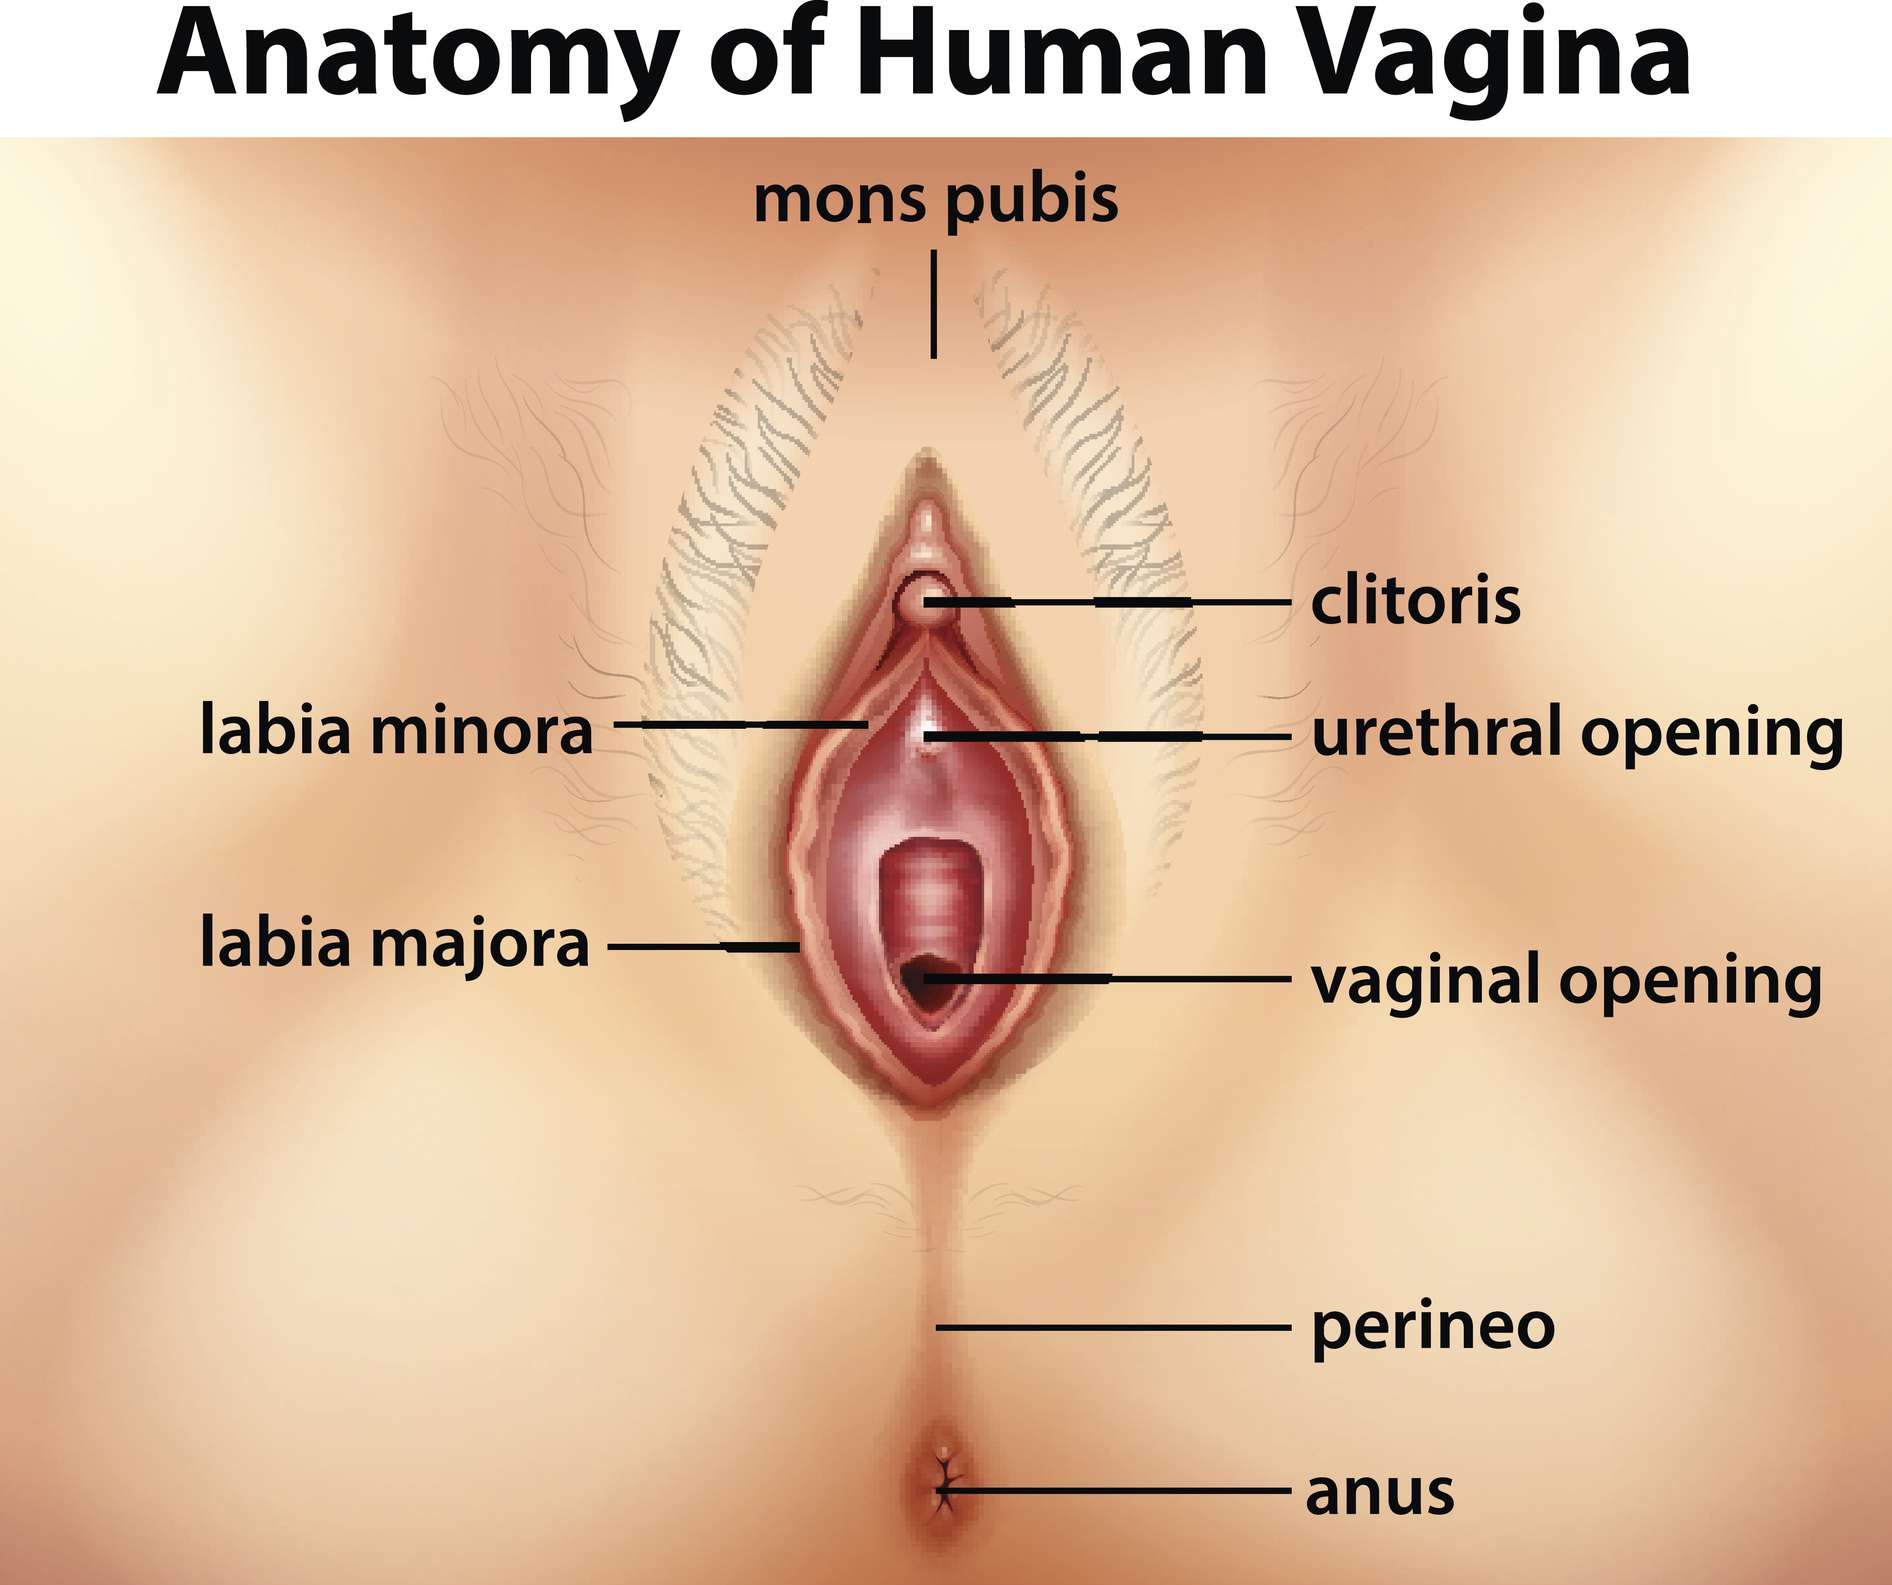 david ritchie recommends woman vagina picture pic